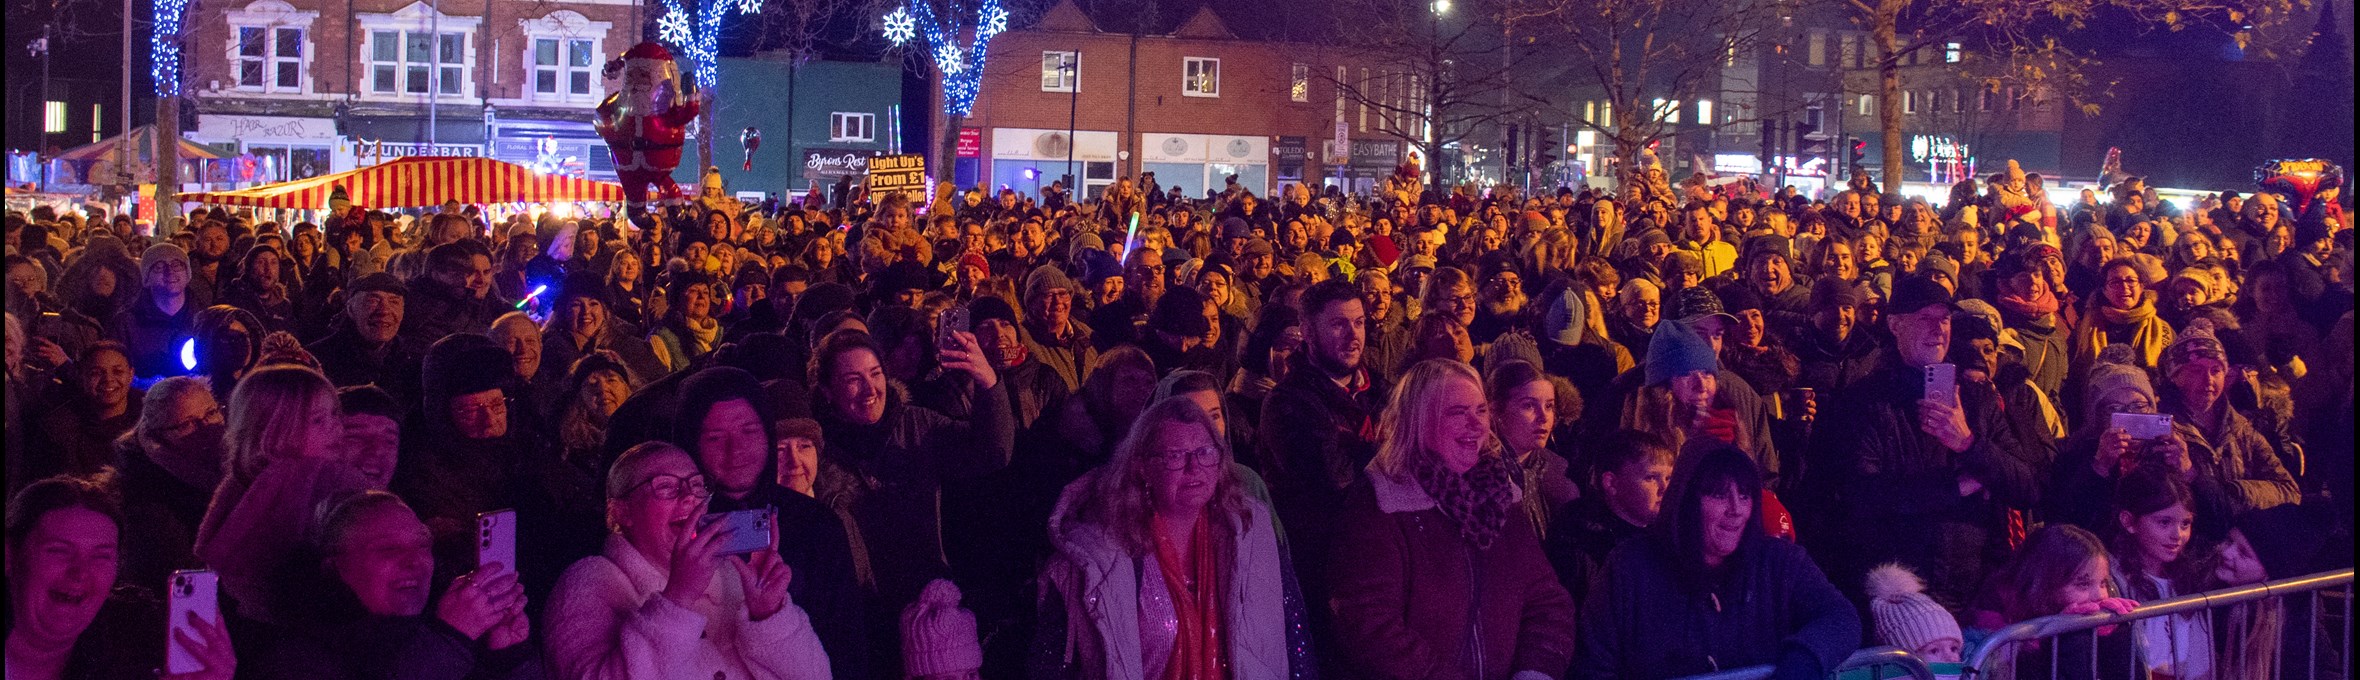 Thousands of people in the crowd at Hucknall Christmas event 